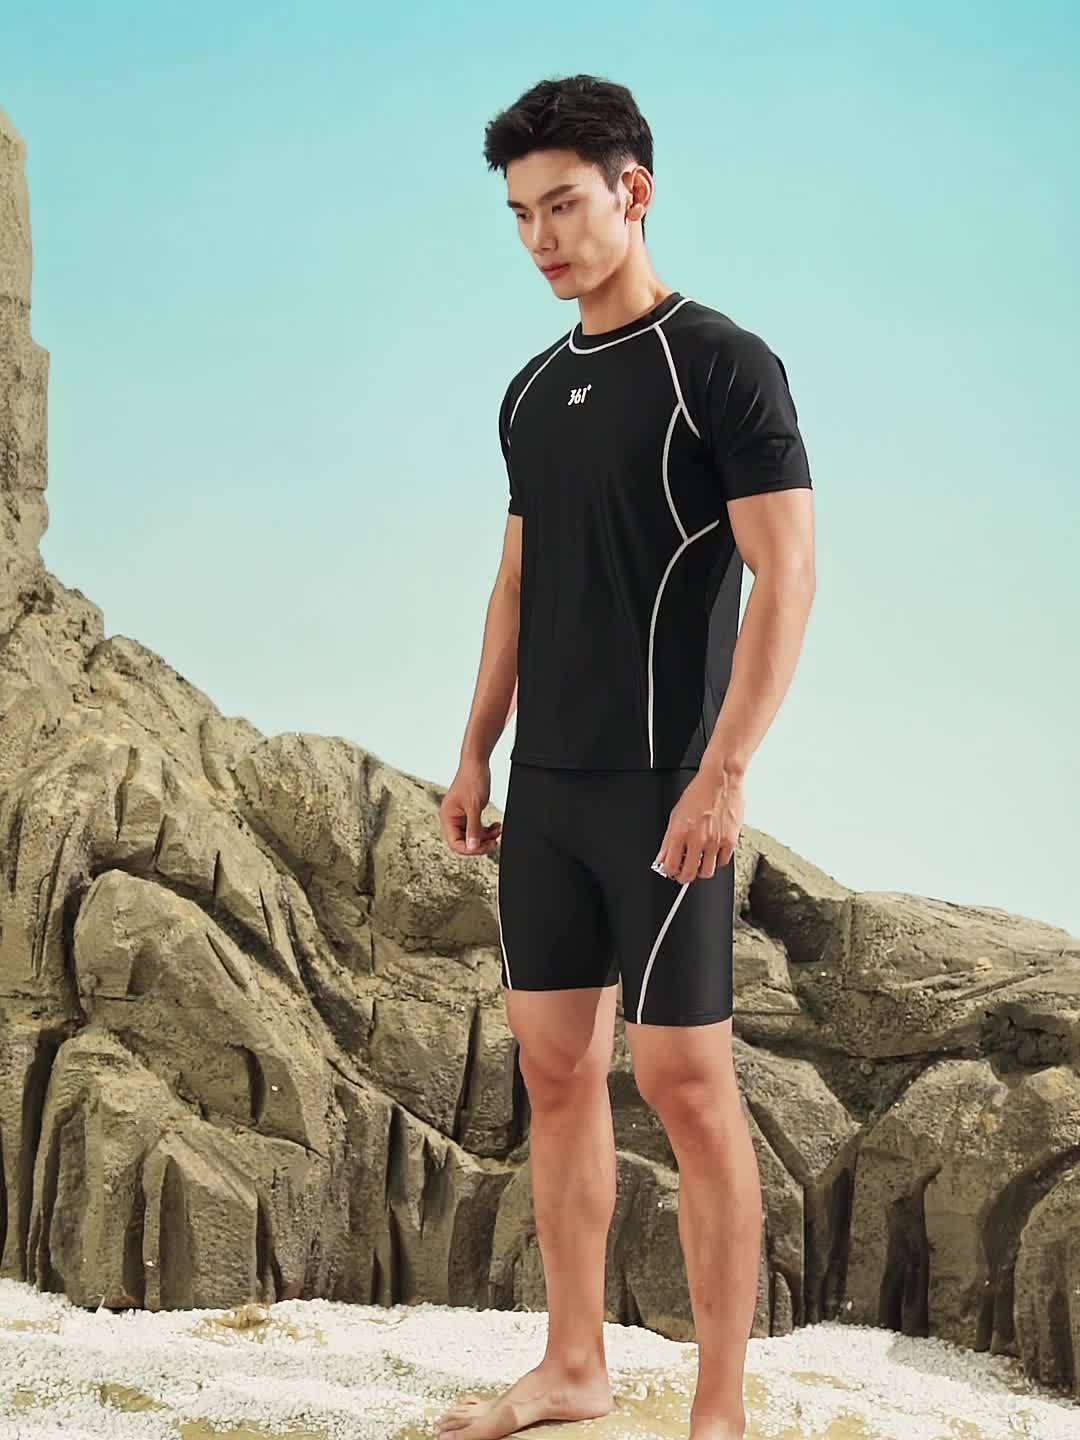 Men's Training Clothing Collections